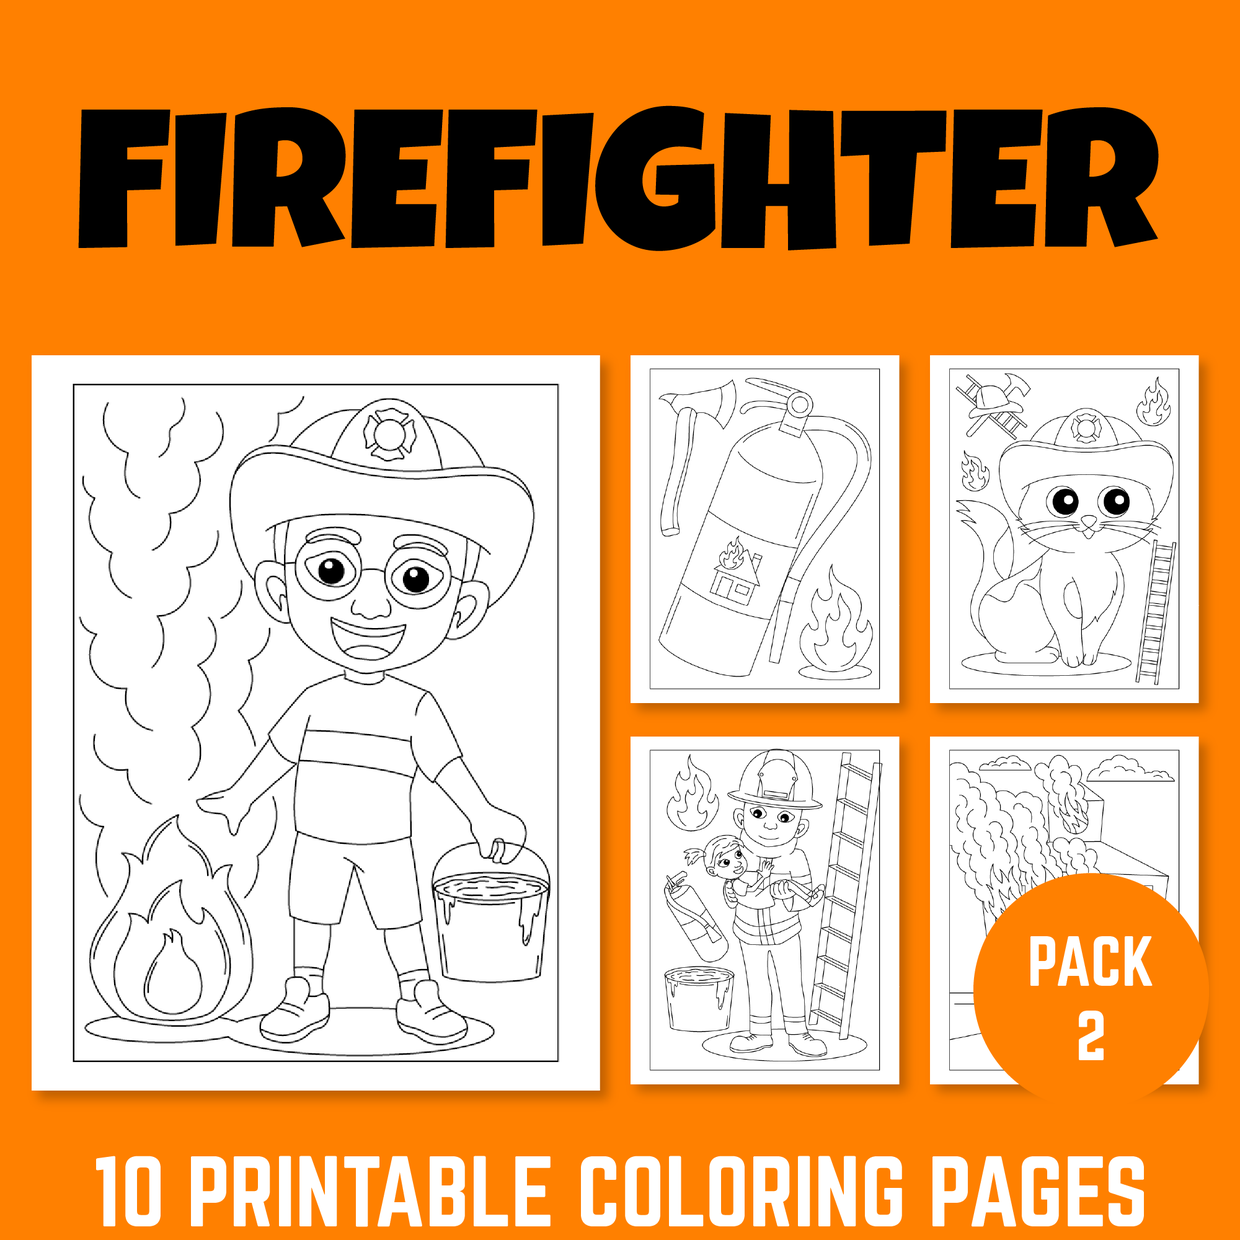 Firefighter rescue coloring pack for career explorati